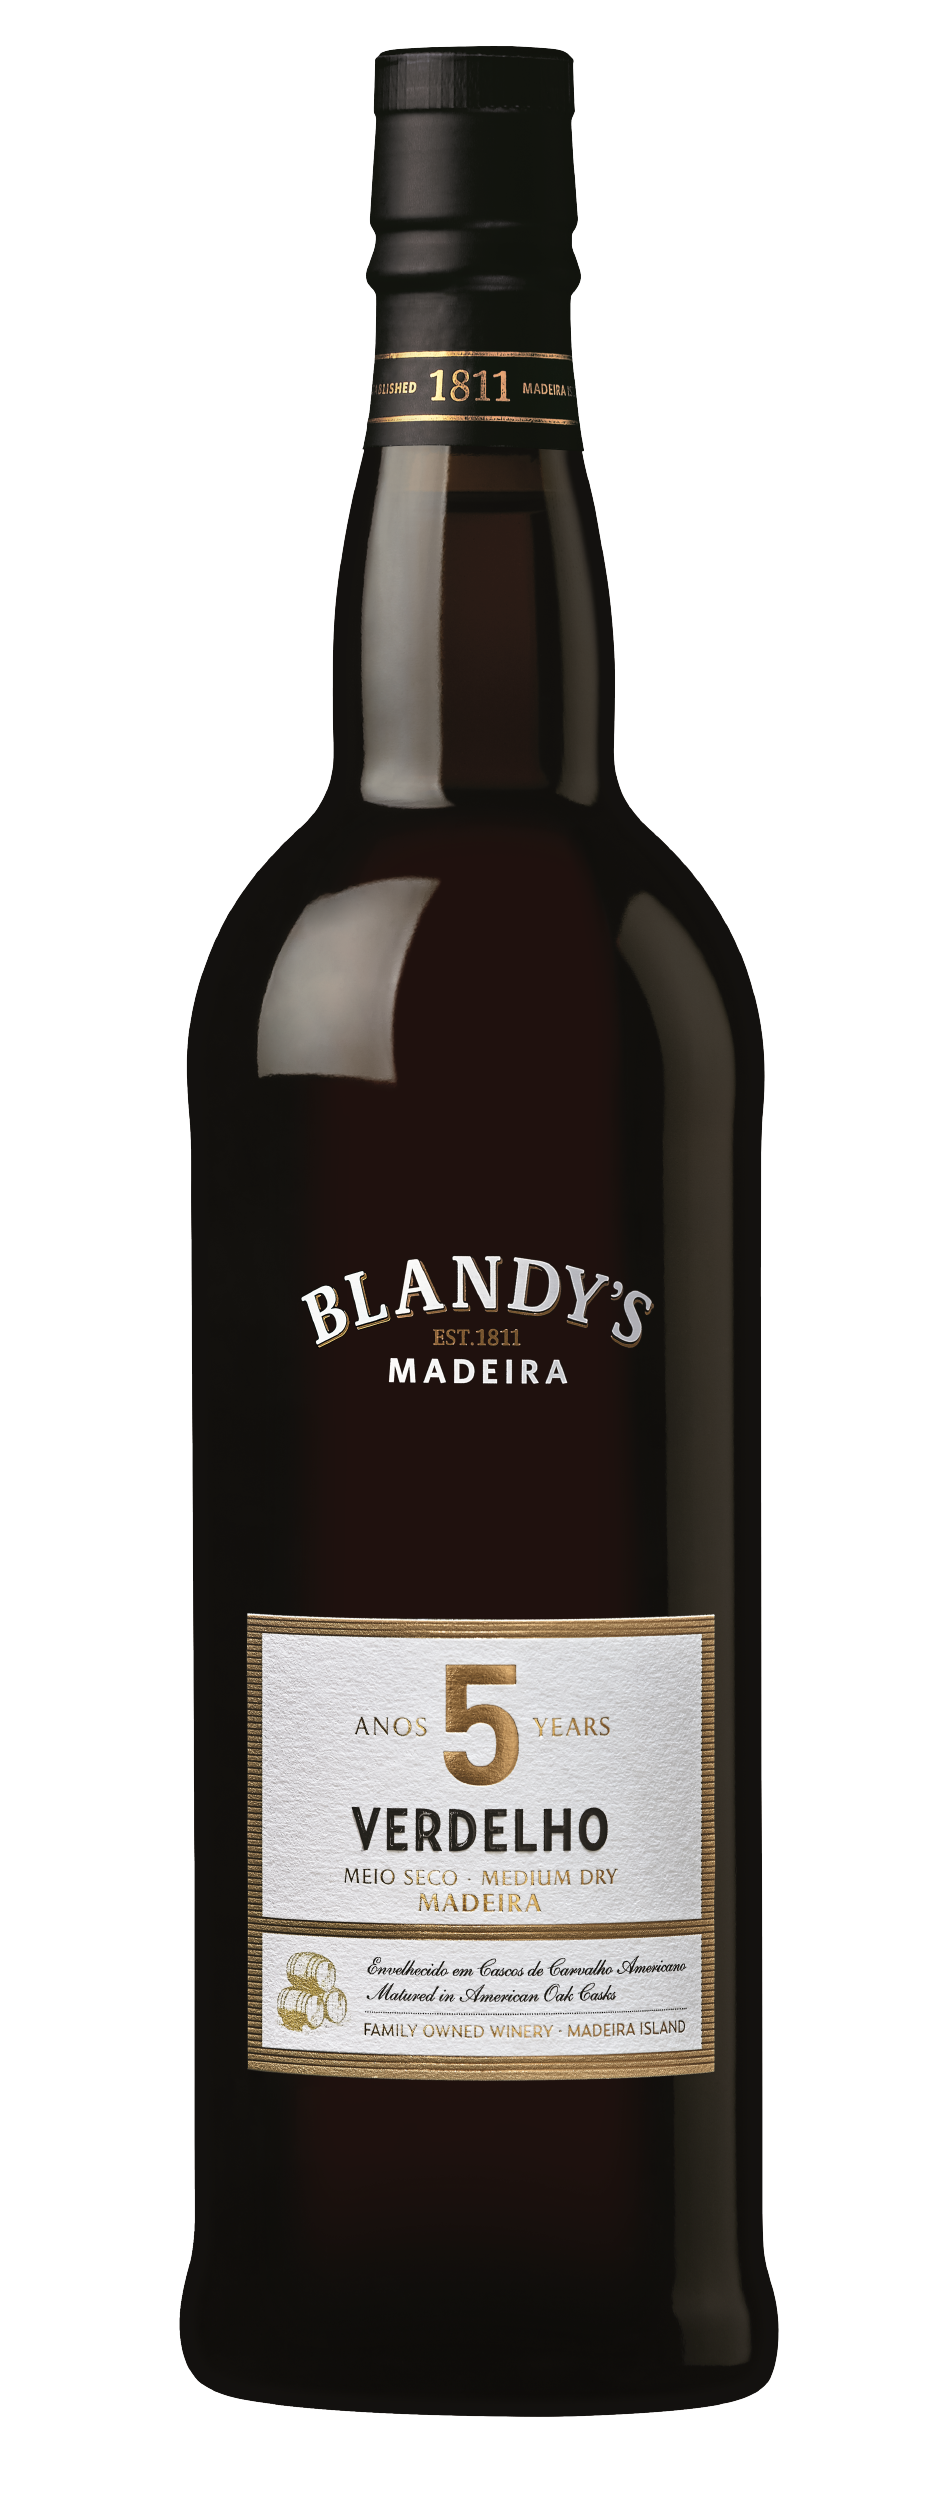 Product Image for BLANDY'S VERDELHO 5 YEAR OLD